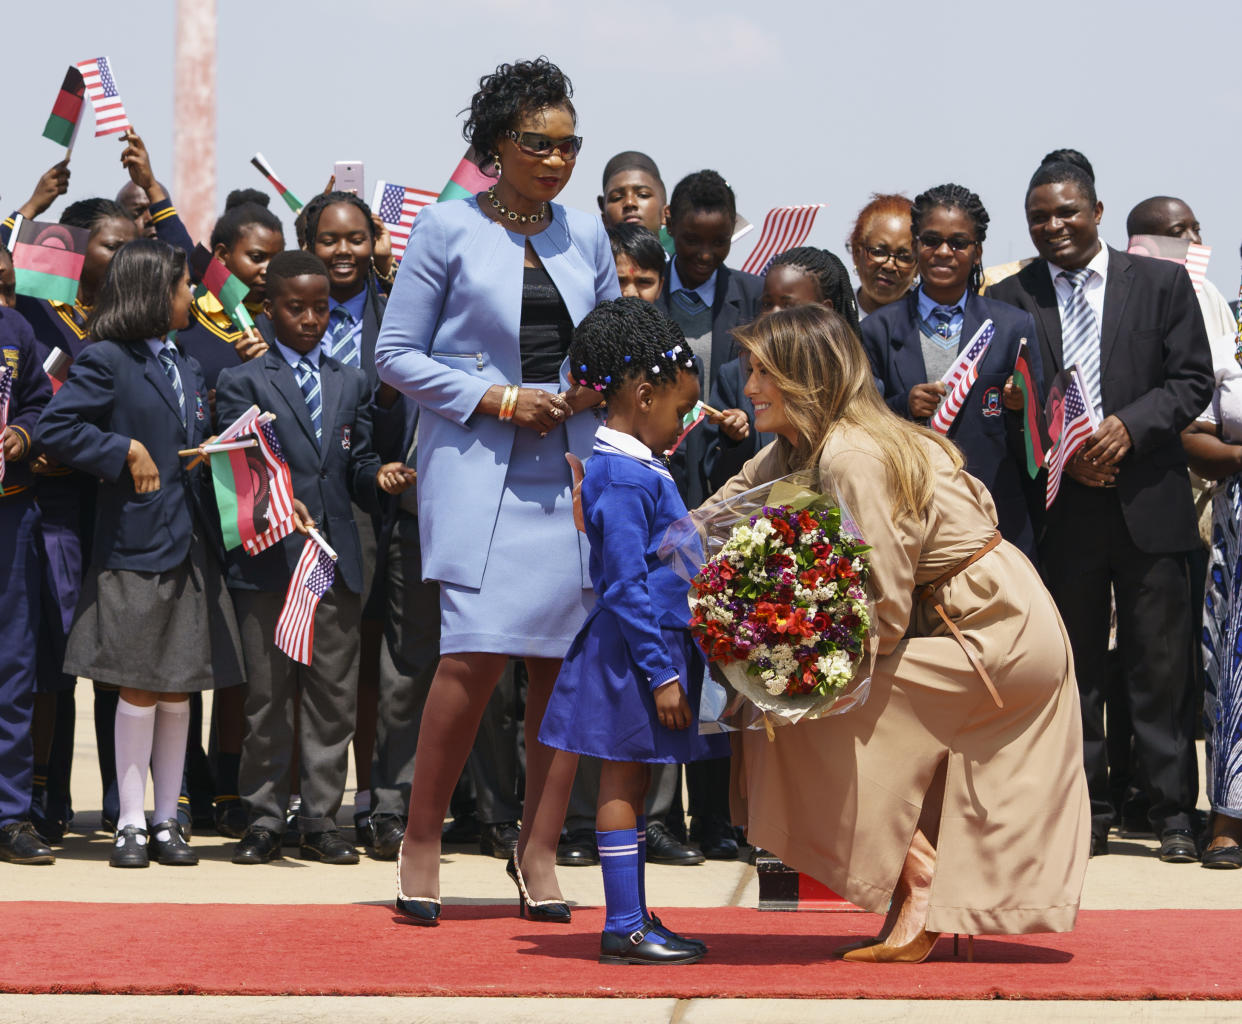 Melania Trump was greeted by a young girl and Gertrude Maseko, the first lady of Malawi, upon her arrival Thursday. (Photo: Carolyn Kaster/AP)